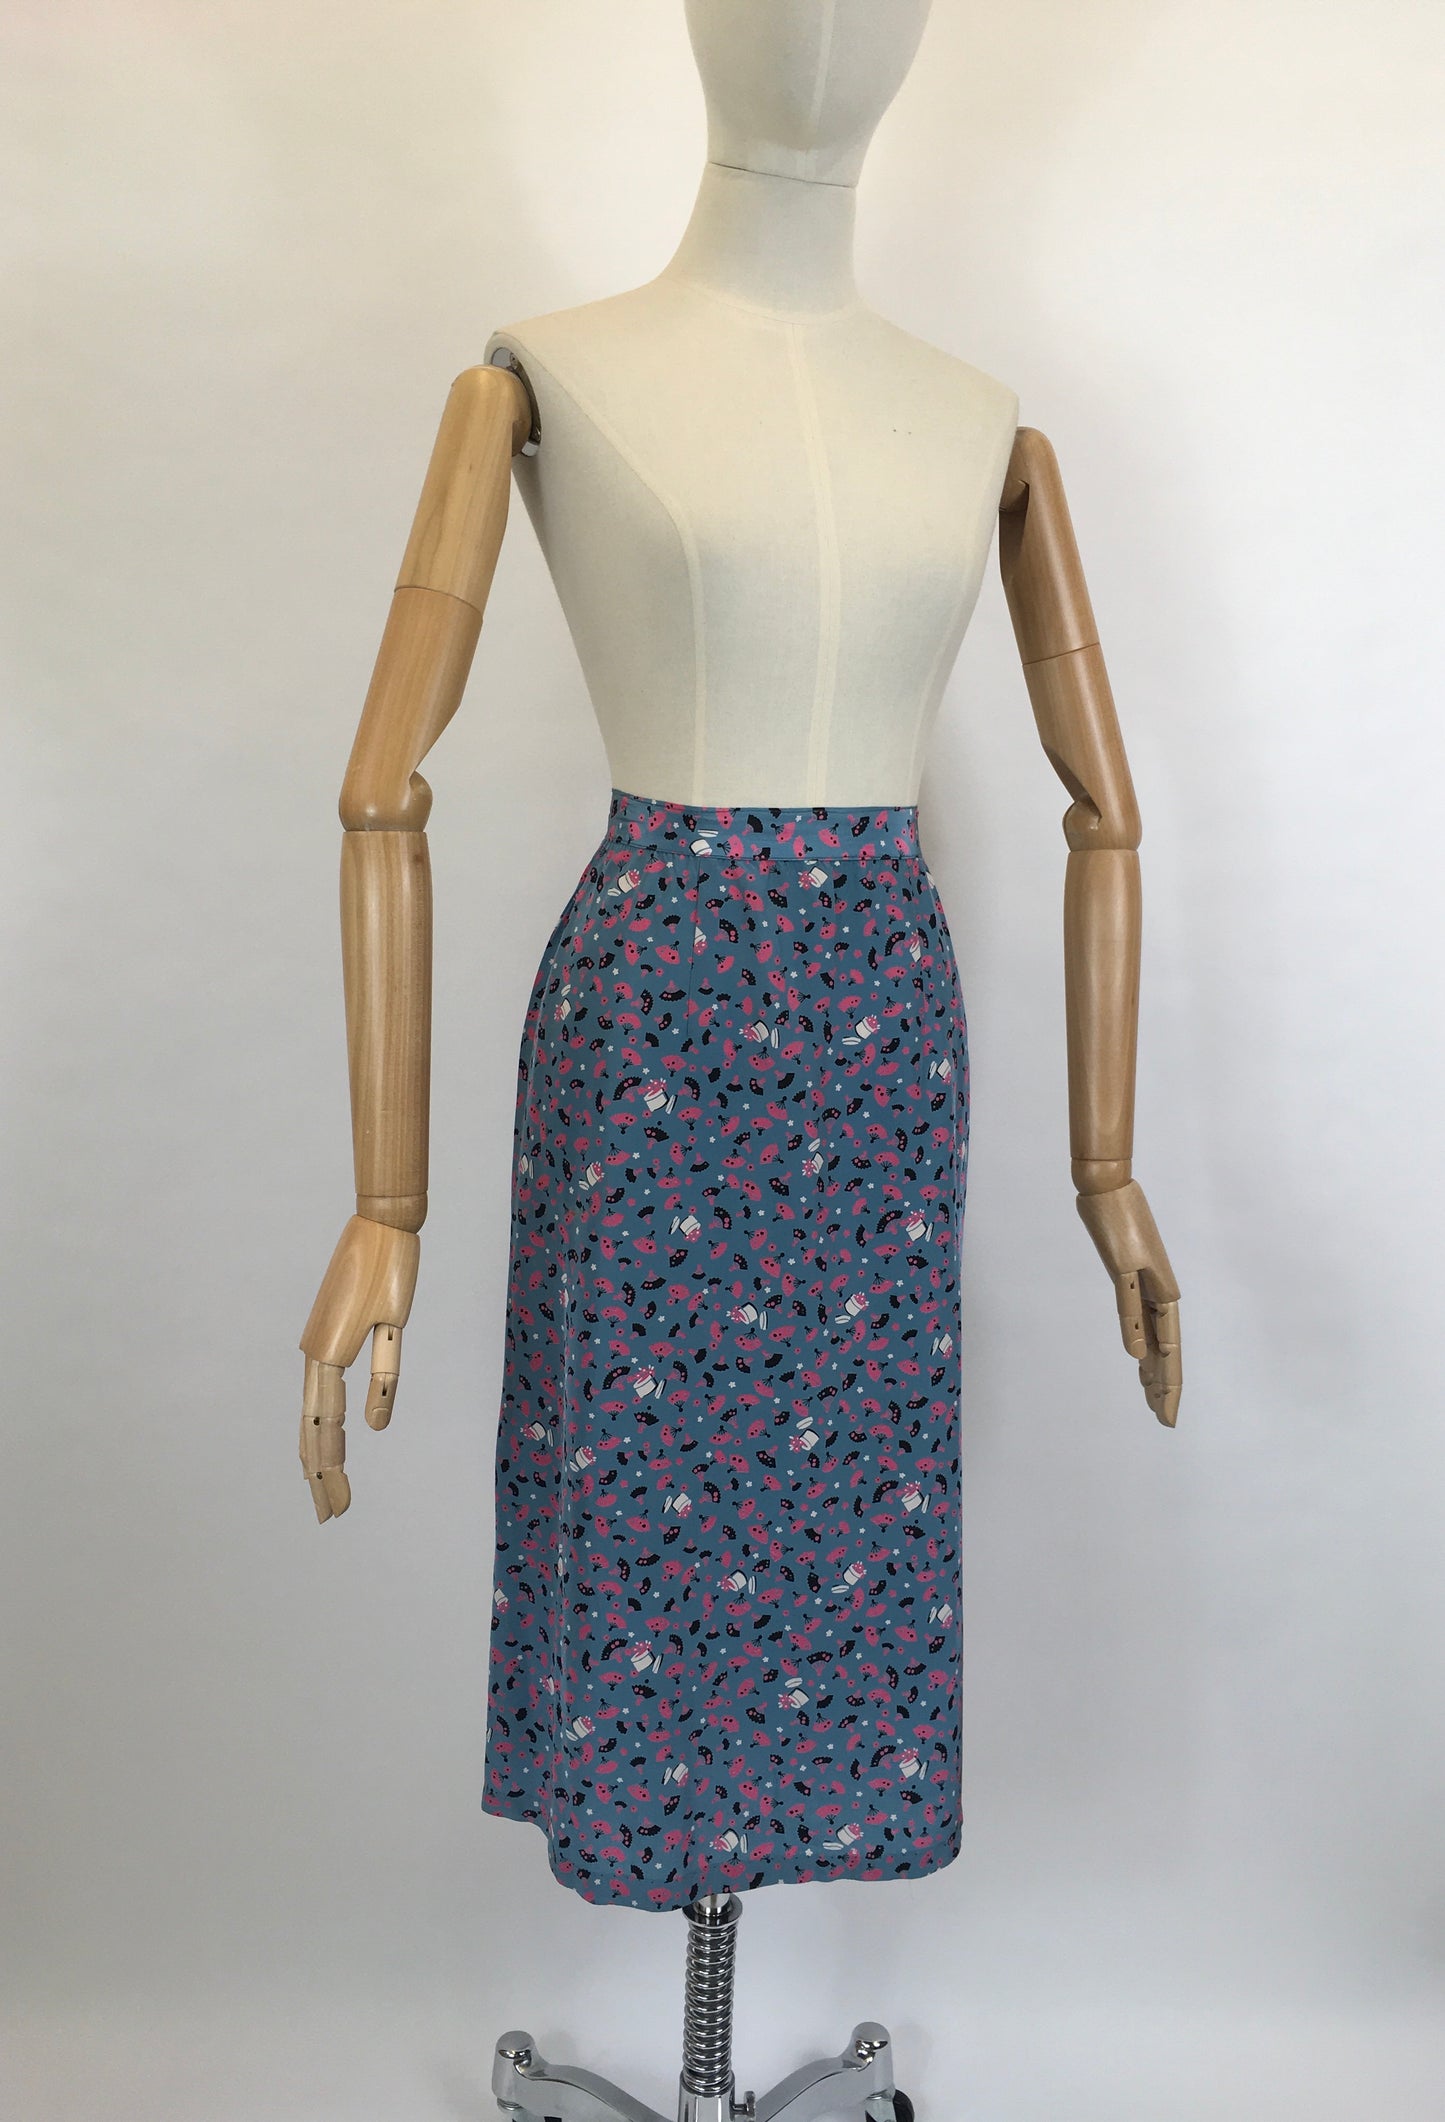 Original 1940’s FABULOUS Novelty Print Rayon Skirt - Featuring A Vanity Scene of Fans, Trinket Pots and Vases